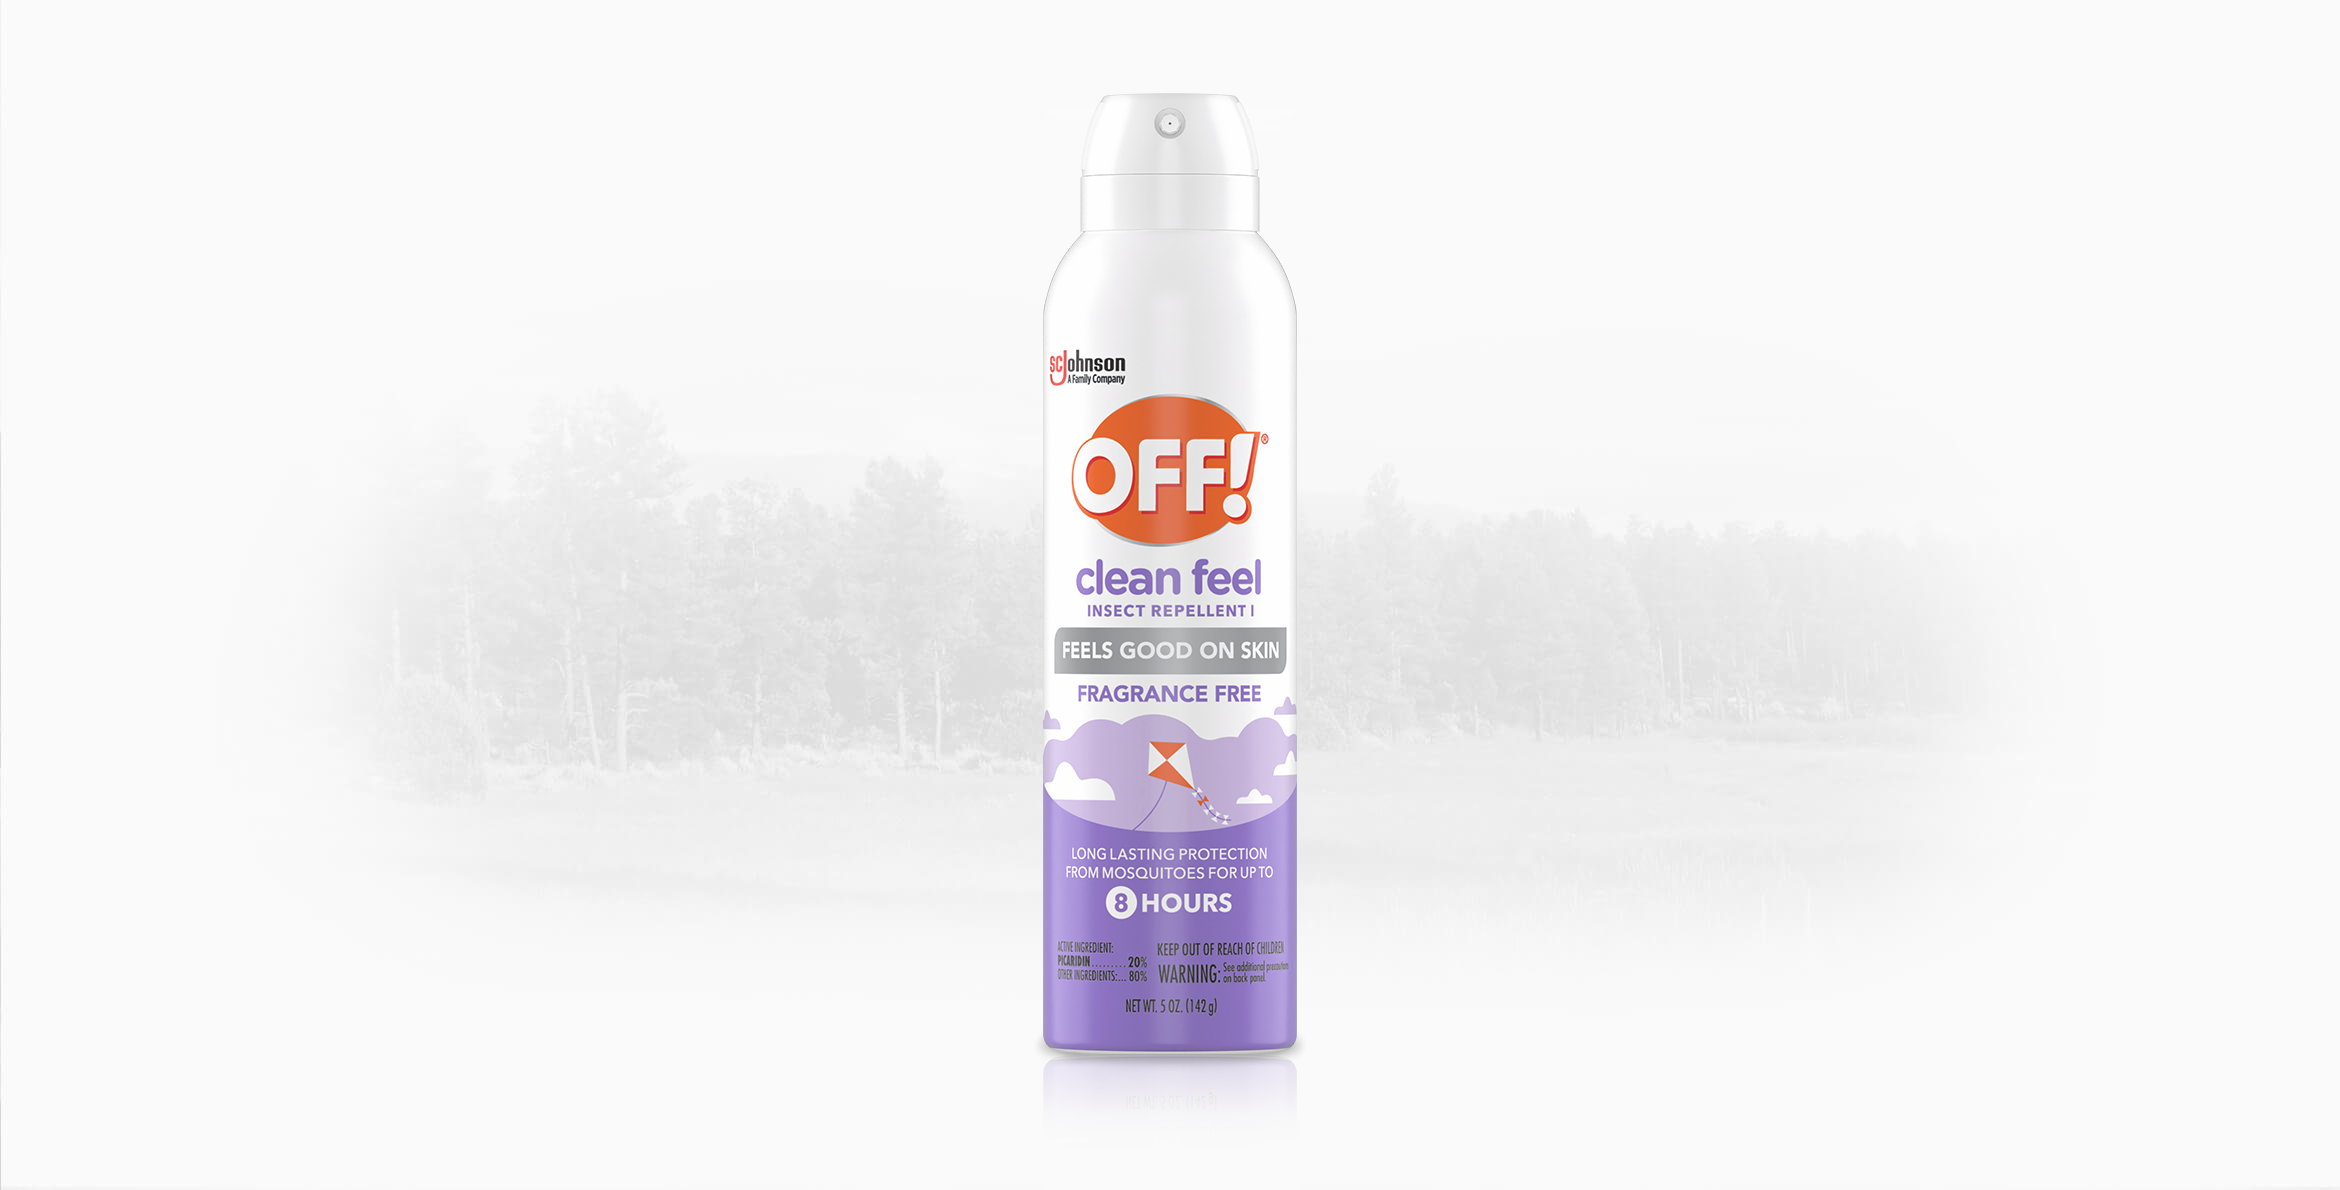 OFF! ® Clean Feel Insect Repellent I